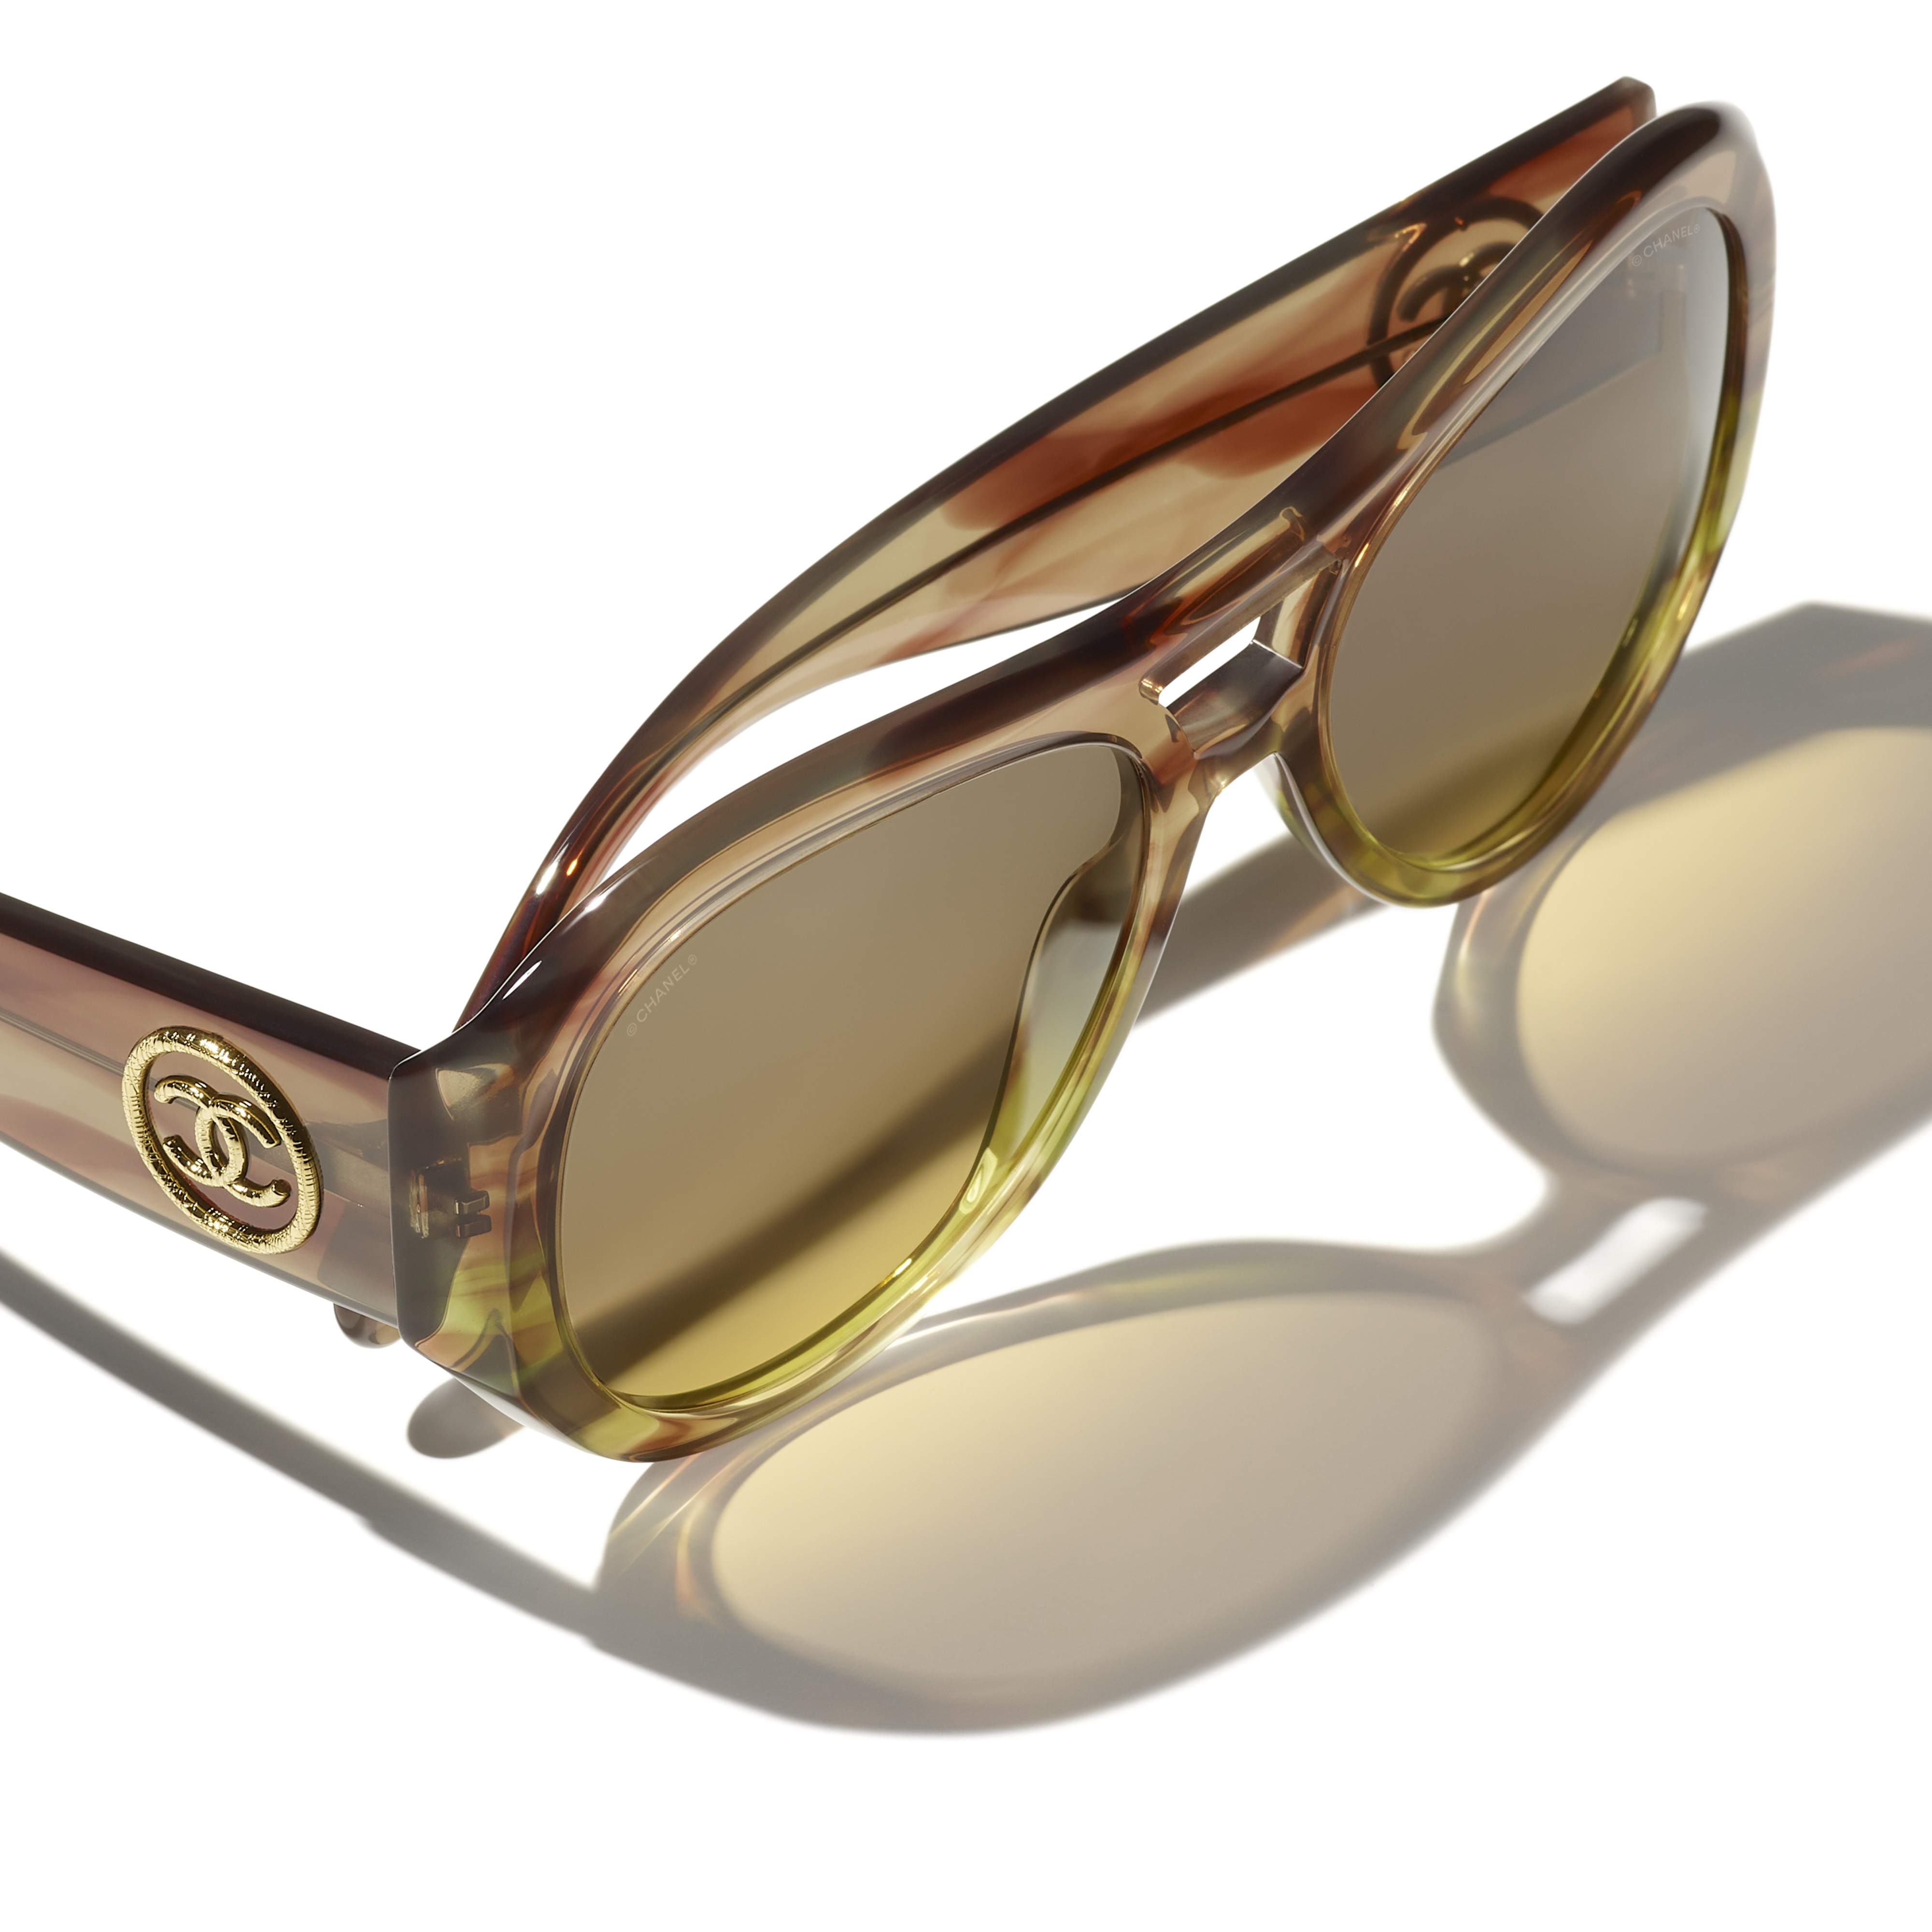 Sunglasses CHANEL CH5508 174311 56-18 Brown Gradient Olive in stock, Price  262,50 €